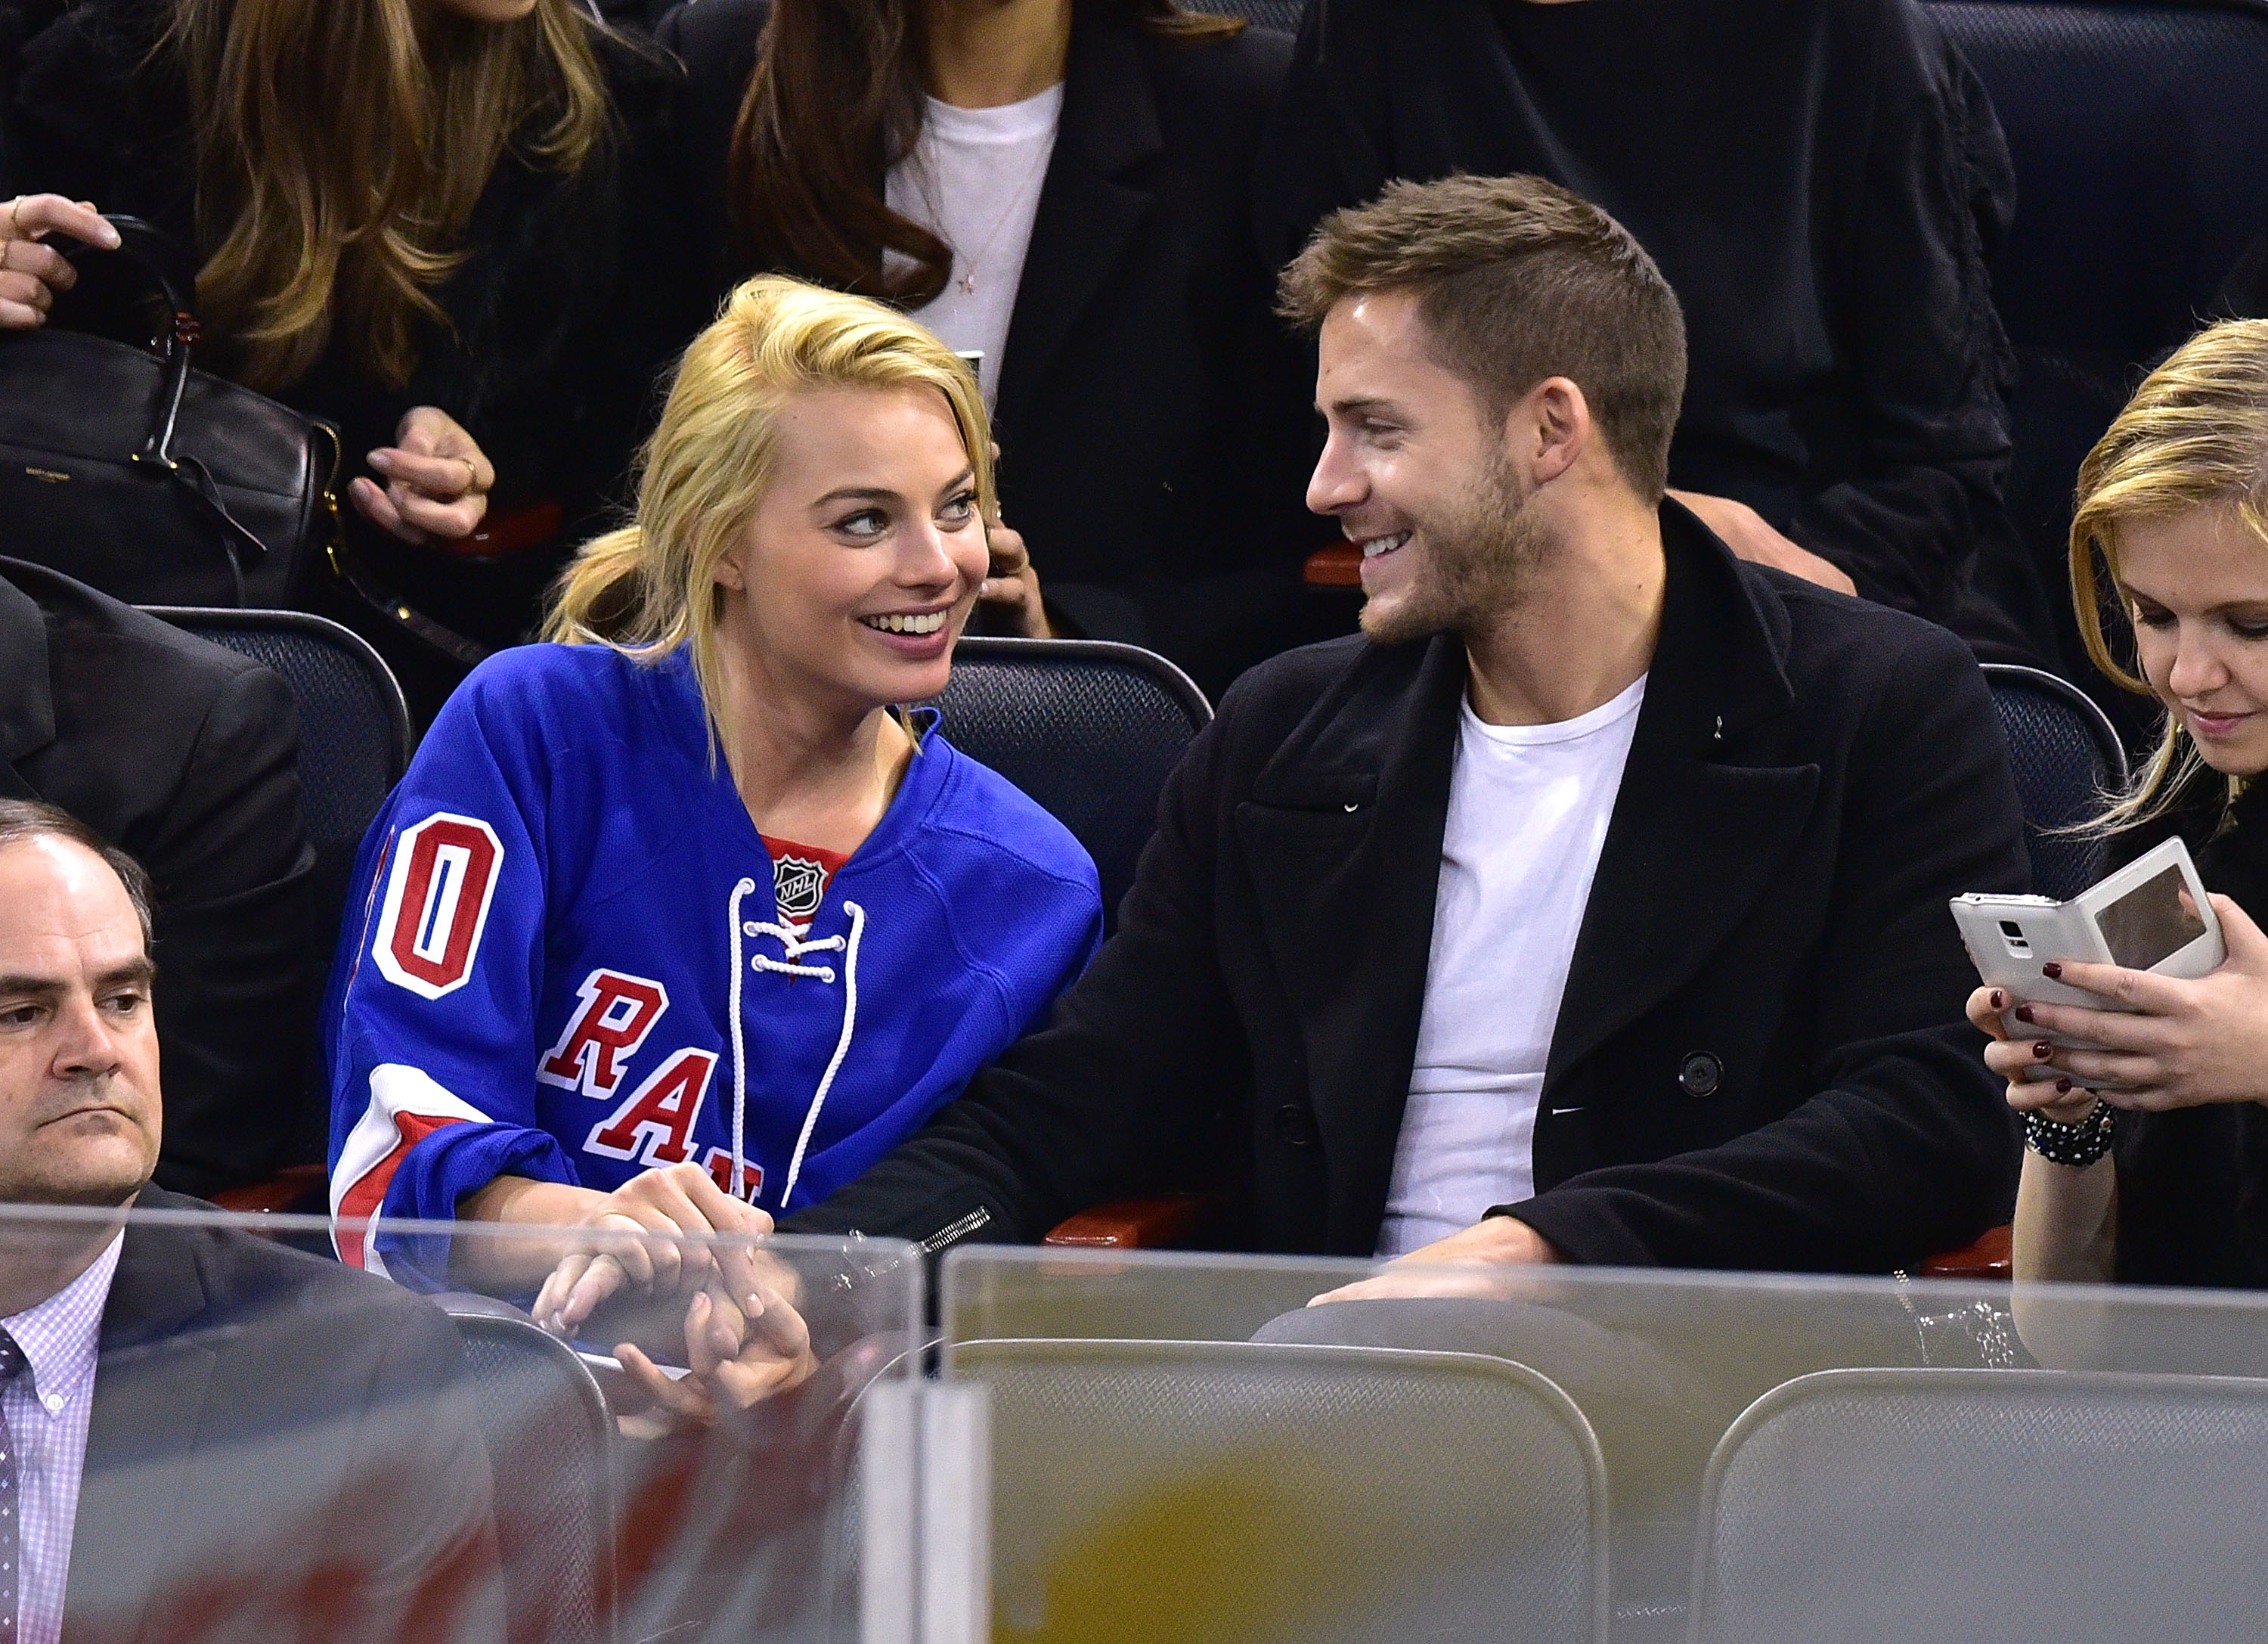 Margot Robbie and her husband Tom Ackerley attend the Arizona Coyotes vs. New York Rangers game at Madison Square Garden on February 26, 2015, in New York City. | Source: Getty Images 